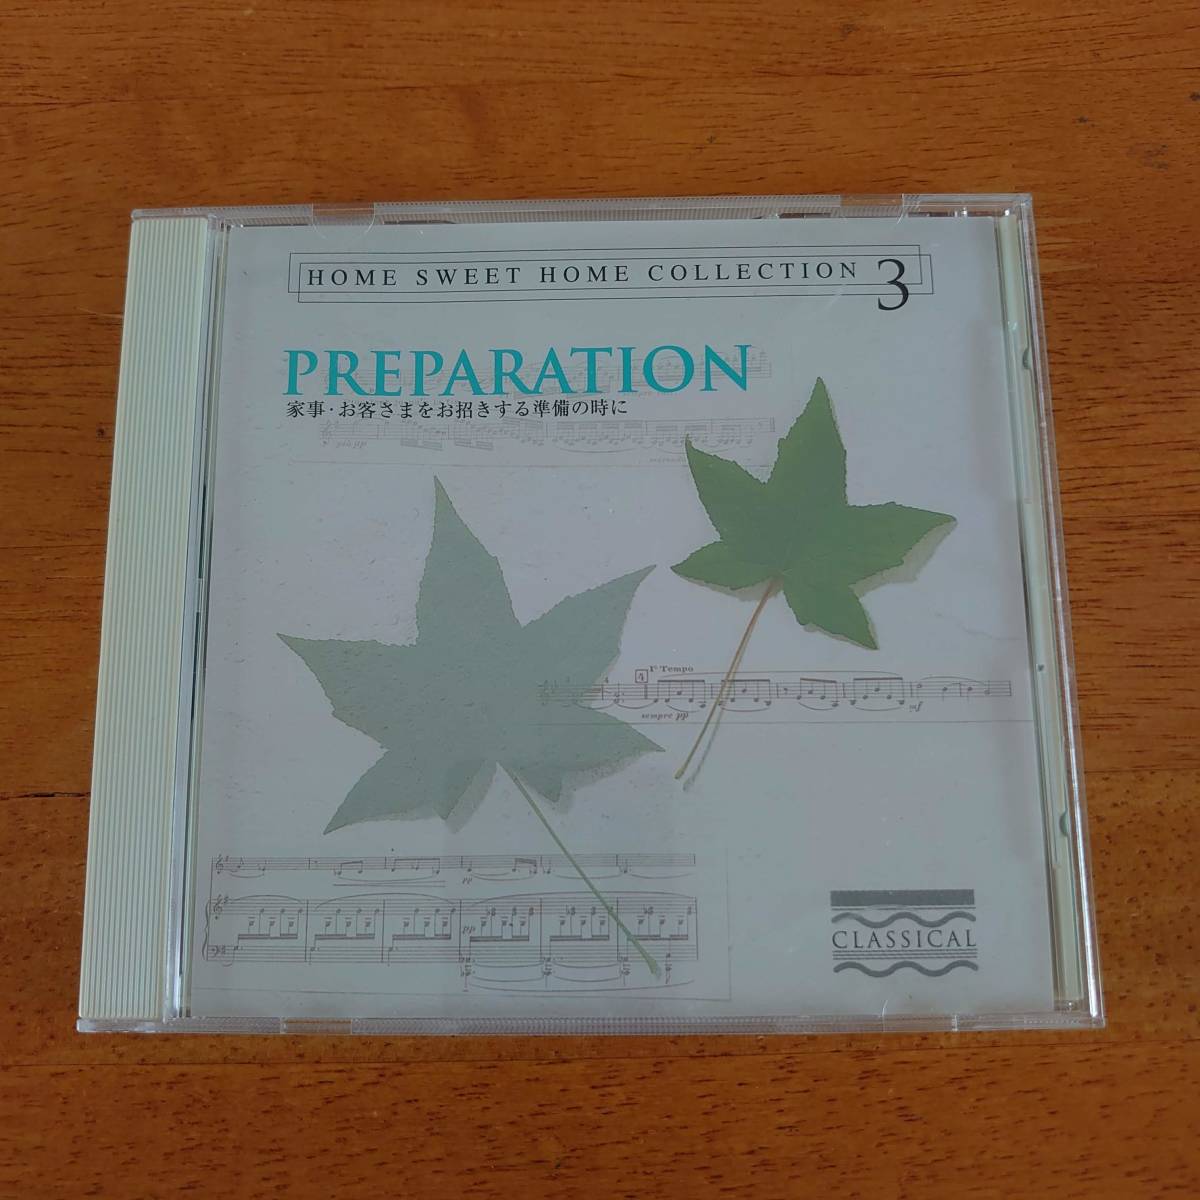 Home Sweet Home Collection 3 Preparation チャイコフスキー/モーツァルト/バッハ/ヘンデル 他 【CD】_画像1